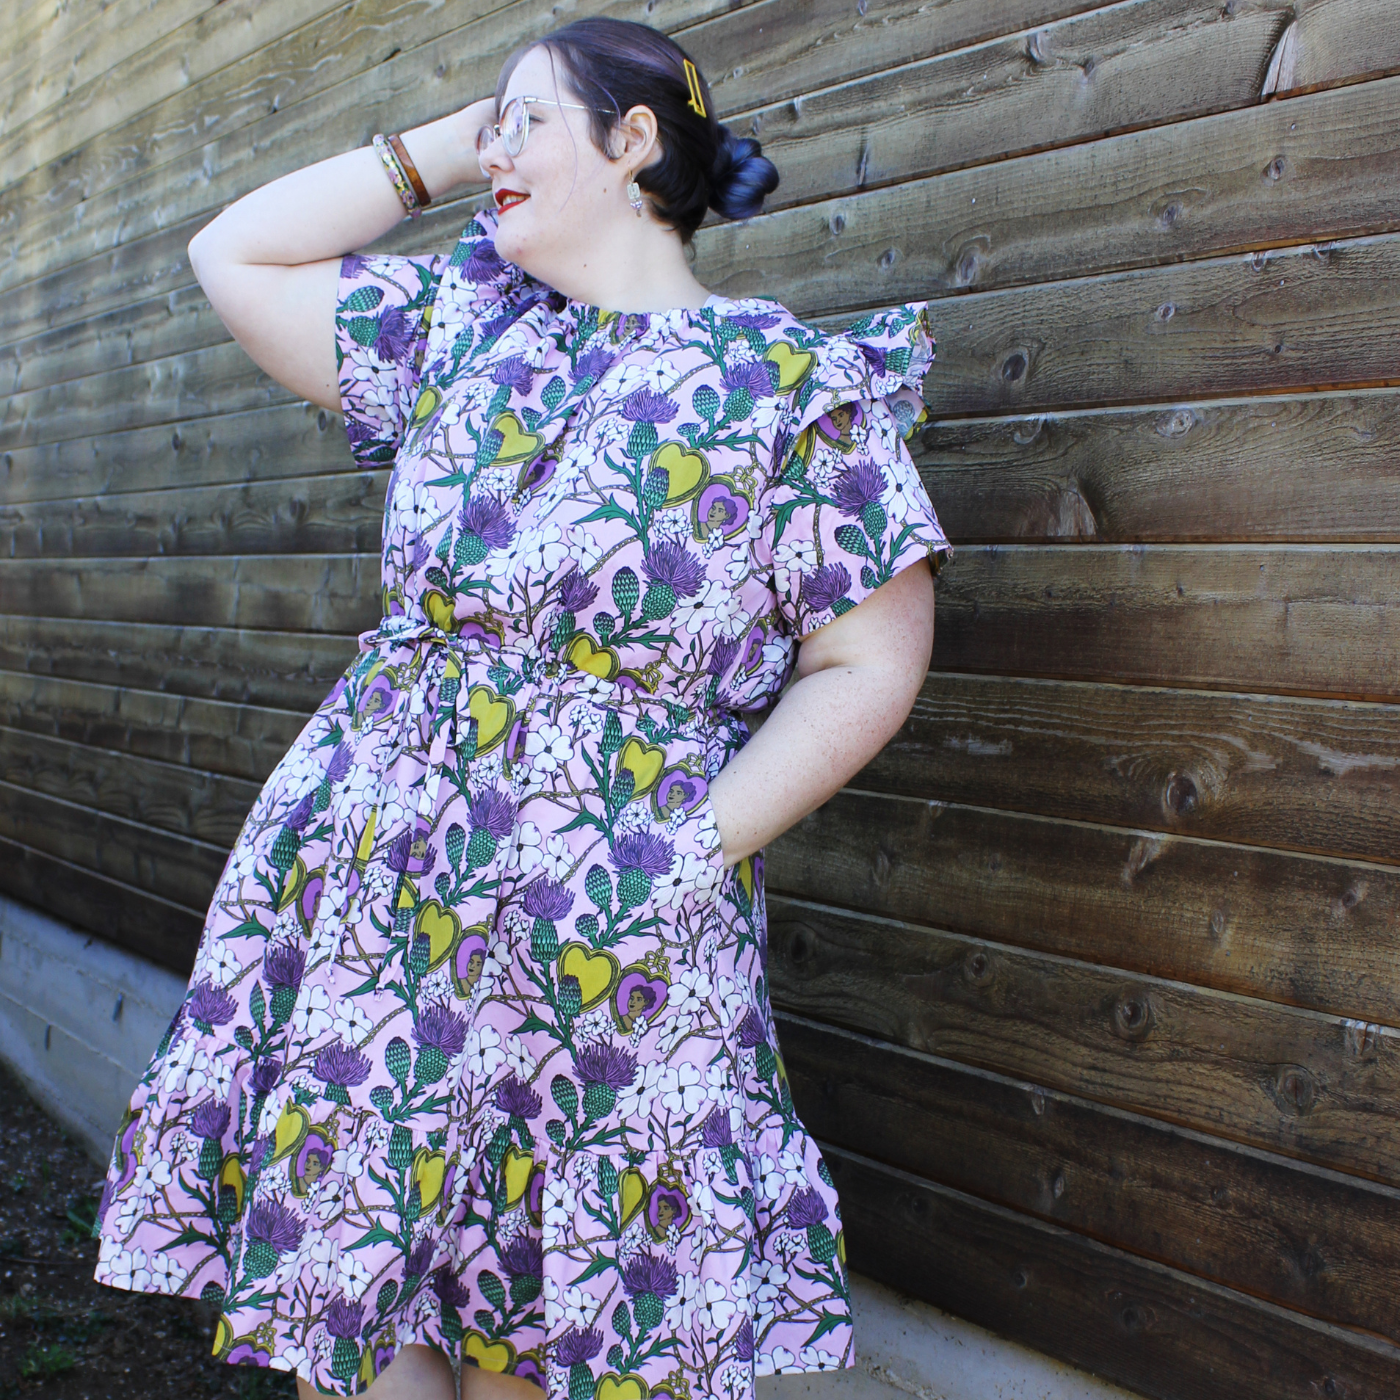 Caroline stands in front of a wood-planked wall looking away from the camera with her left hand in a pocket and her right hand up against her head. She is wearing a dress with a lavender background, yellow hearts, purple and green thistles and small white dogwood flowers.